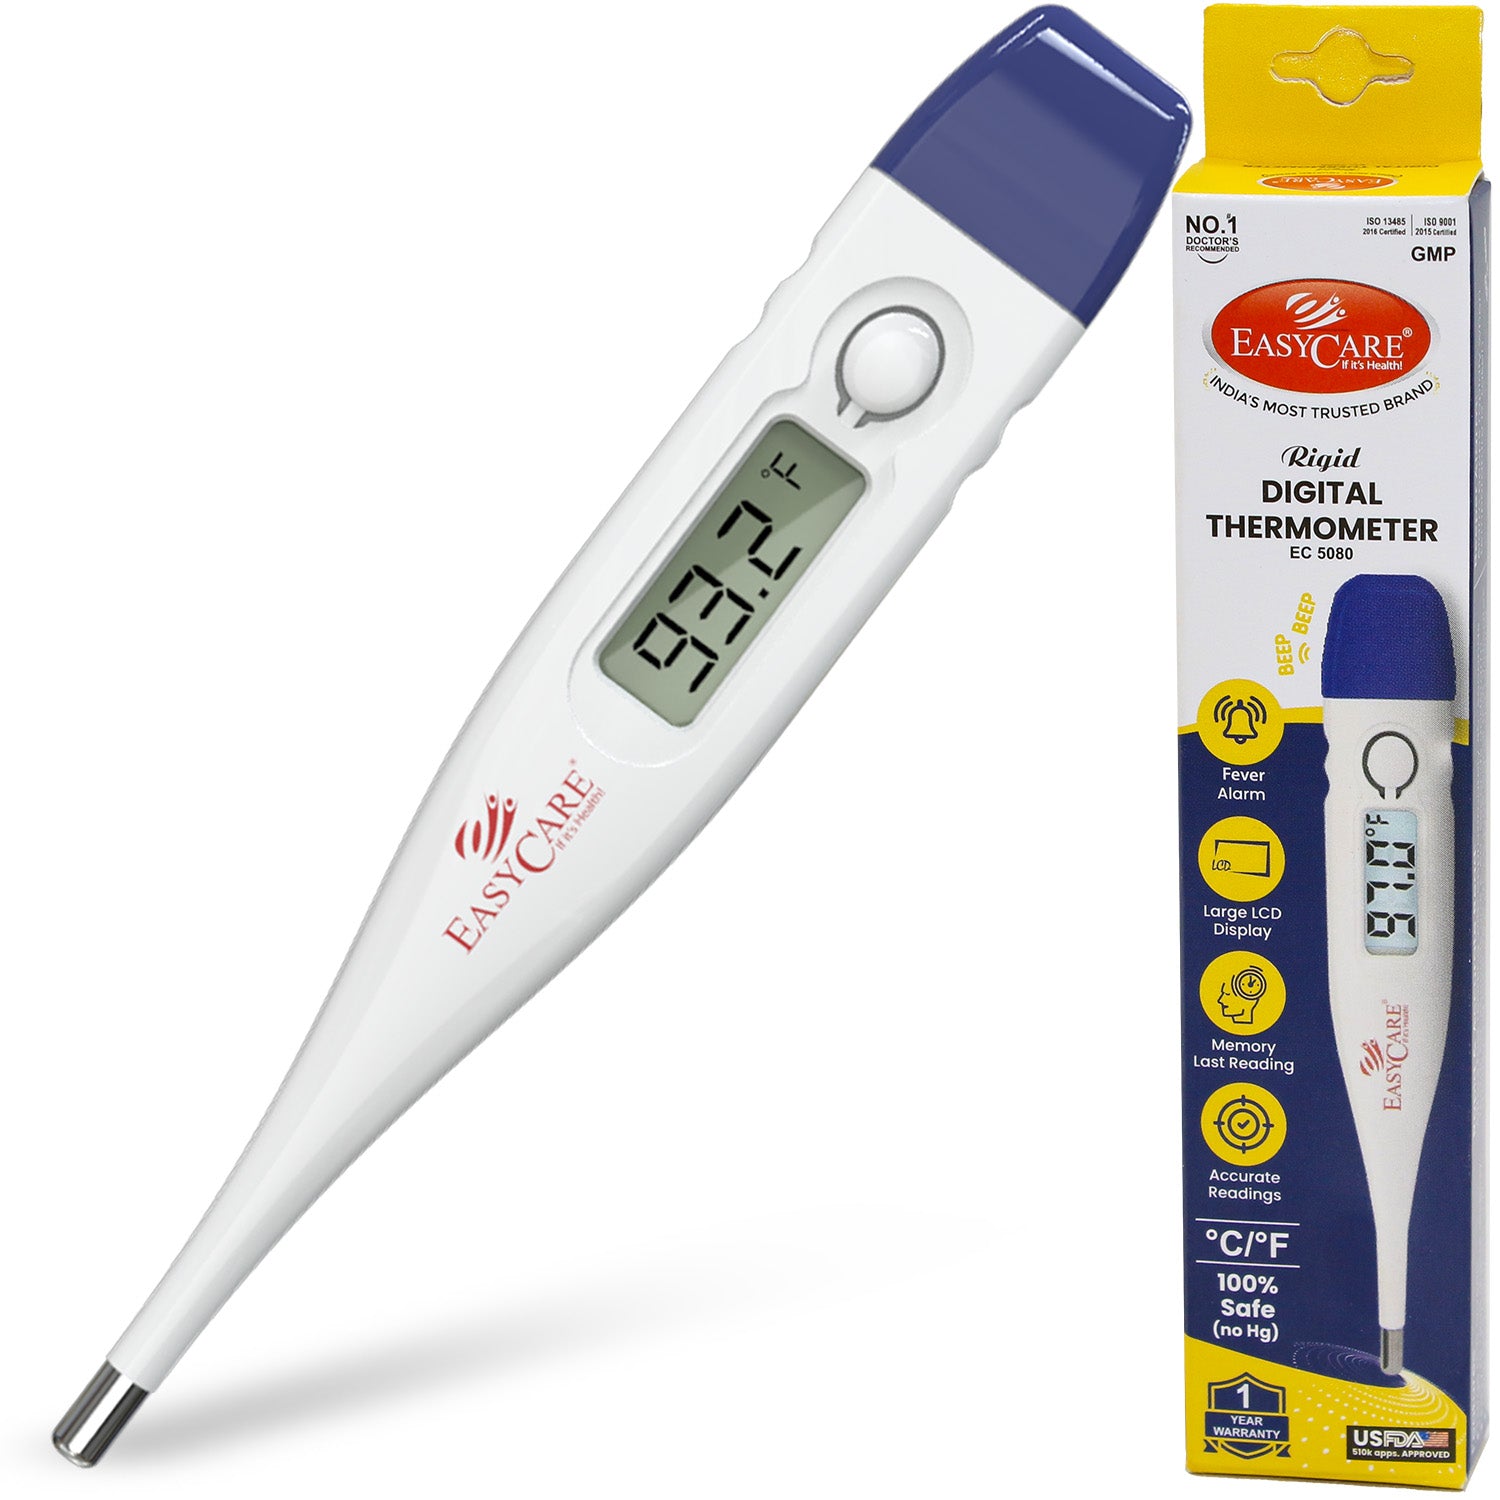 Buy Digital Thermometer Online at Best Price in India  EASYCARE - EASYCARE  - India's Most Trusted Healthcare Brand